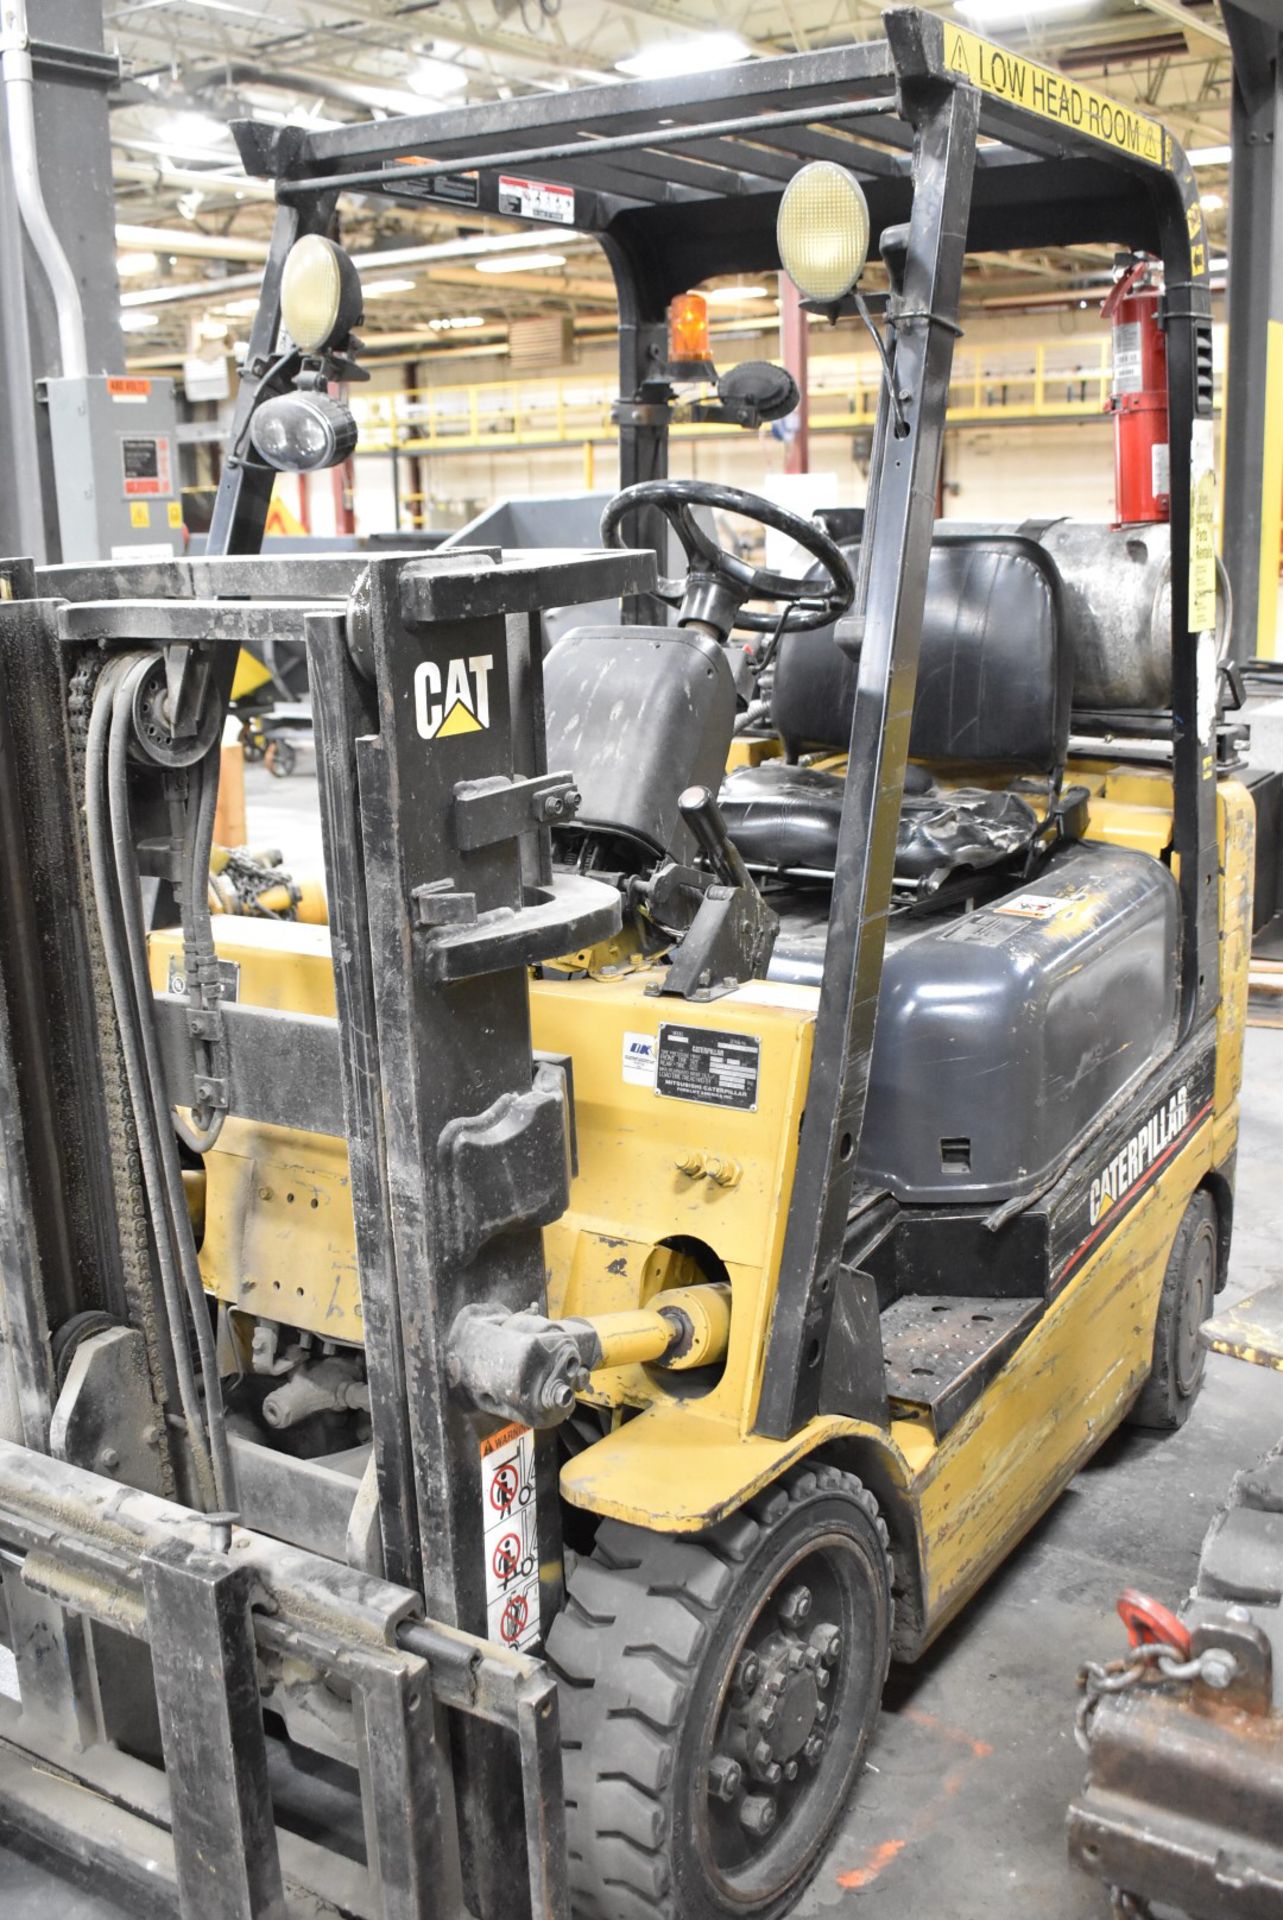 CATERPILLAR GC25 4,650 LBS. CAPACITY LPG LOW PROFILE FORKLIFT WITH 80" MAX VERTICAL REACH, 2-STAGE - Image 3 of 8